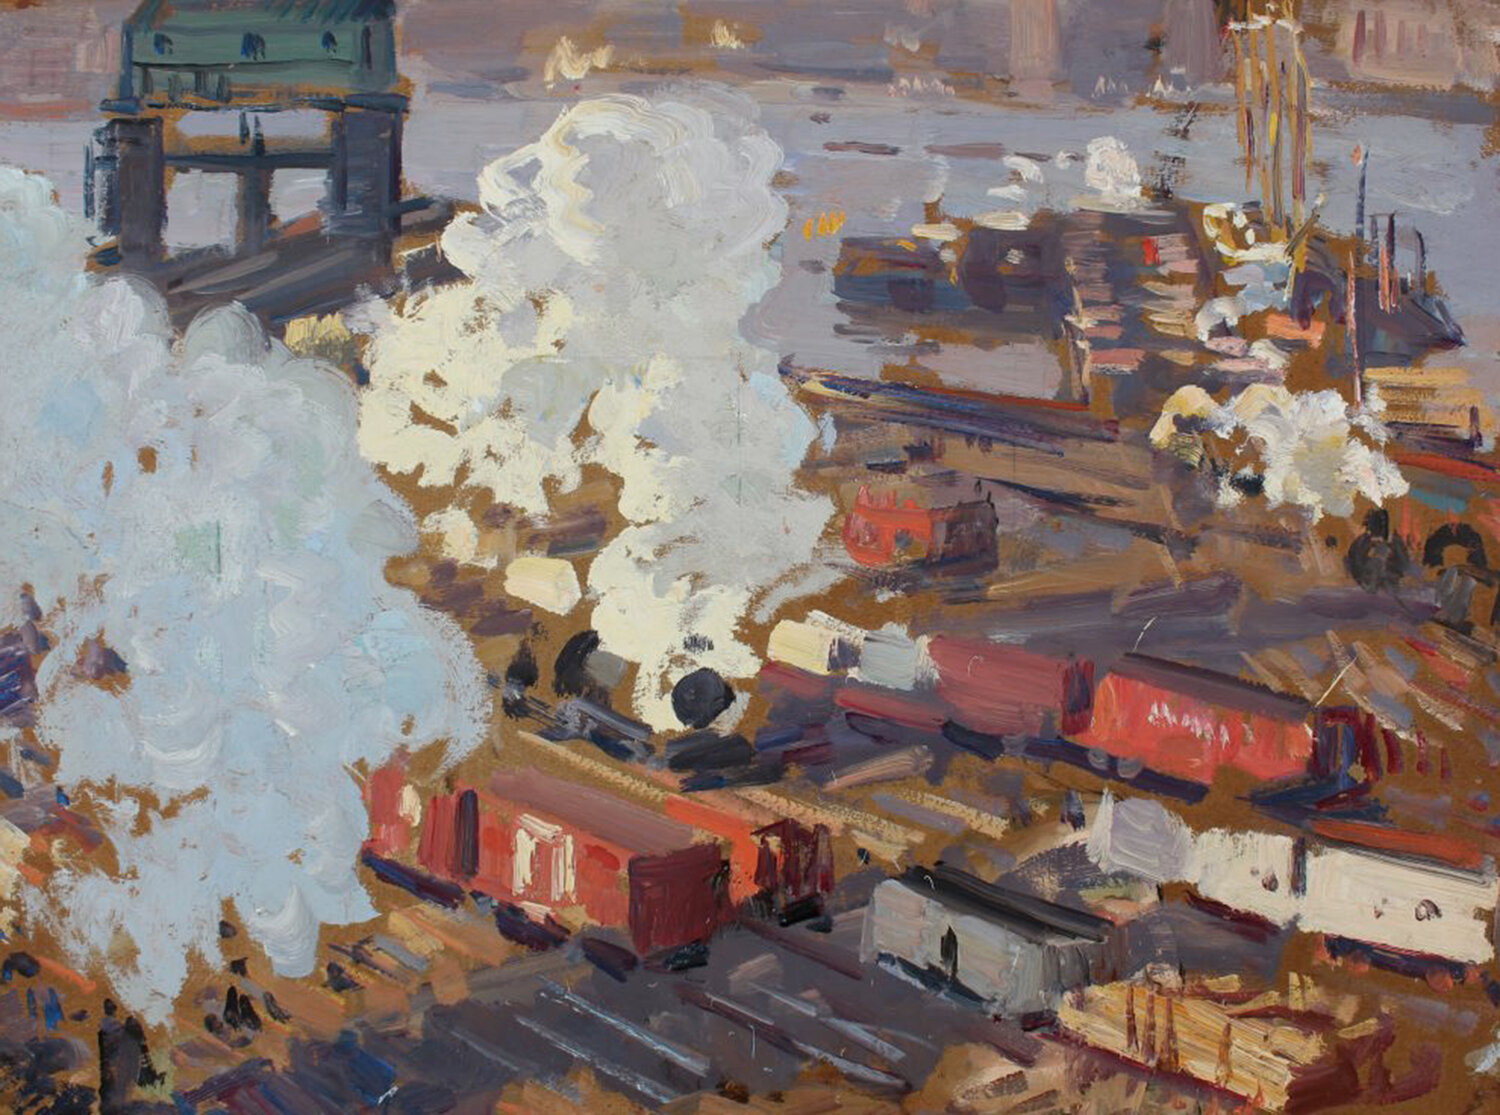 Image of railway yard with steam in blue, red, browns, and grays by Gifford Beal